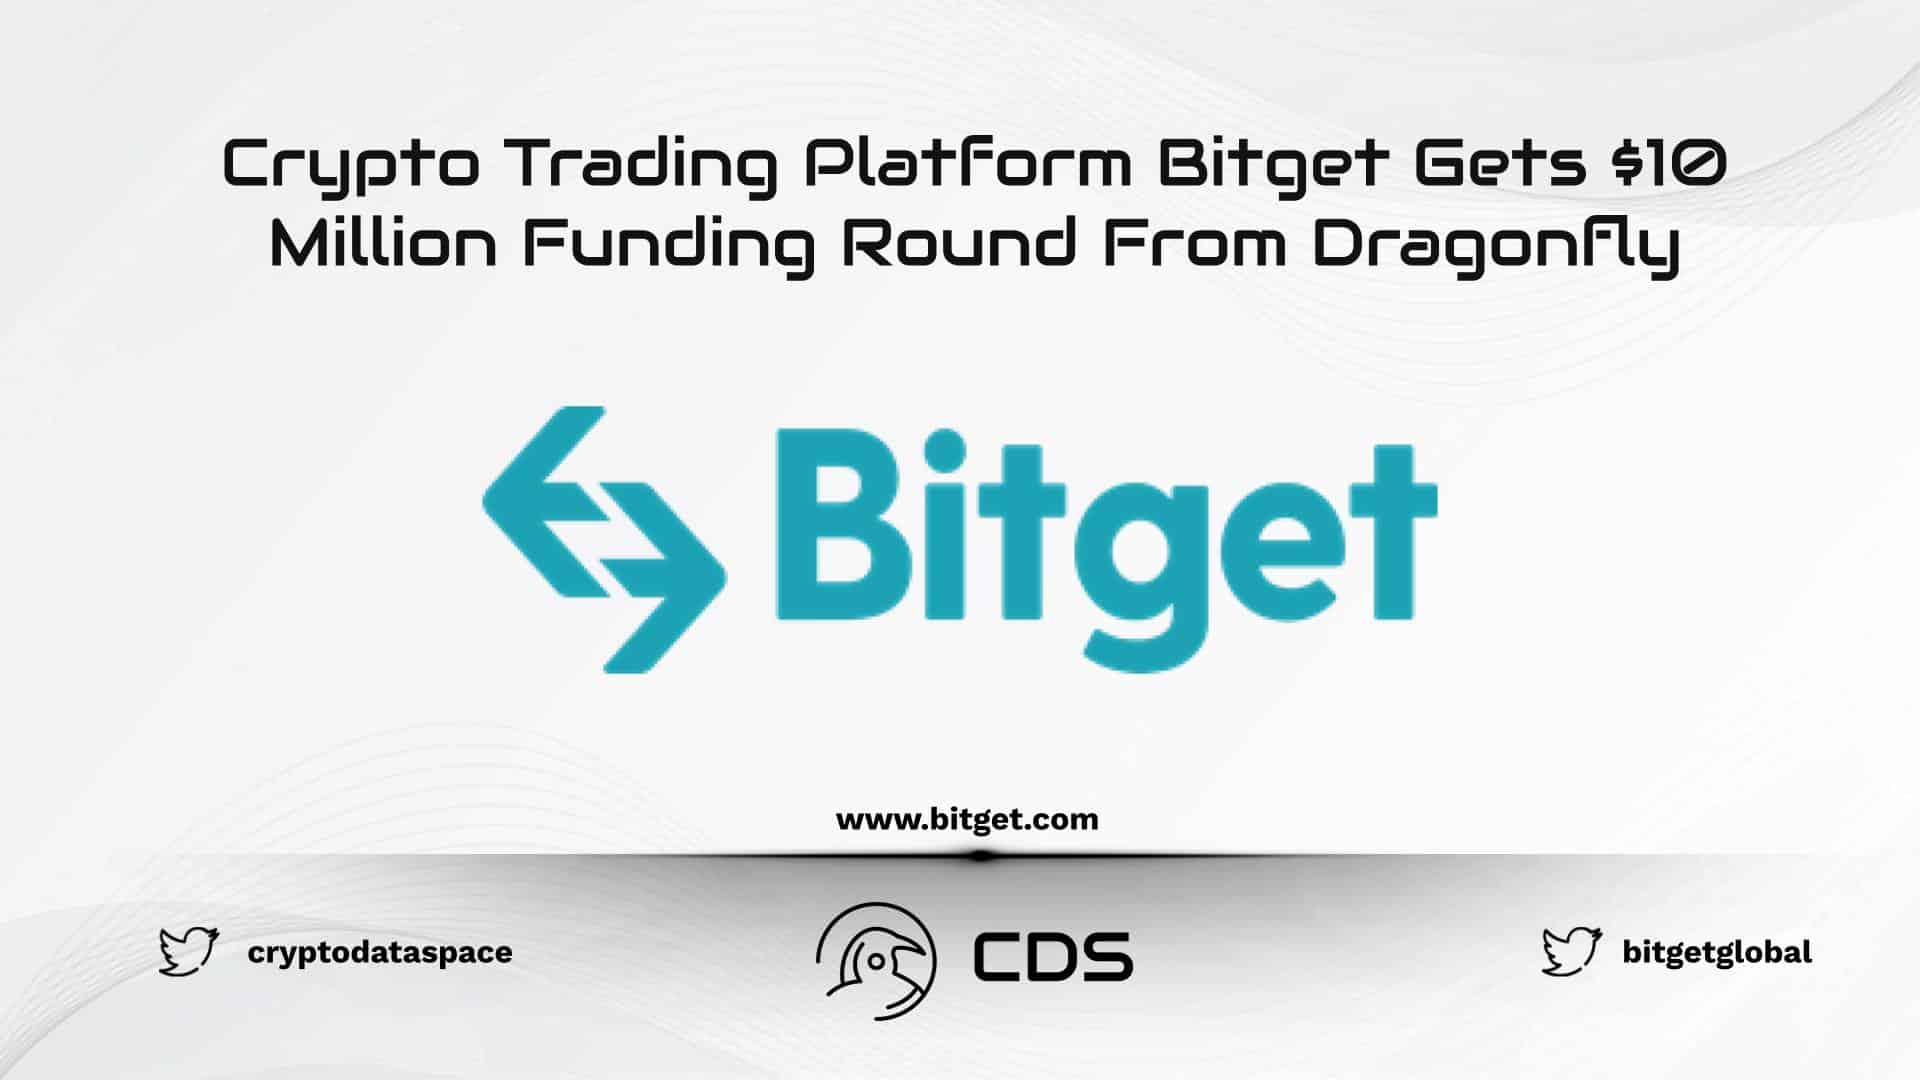 Crypto Trading Platform Bitget Gets $10 Million Funding Round From Dragonfly